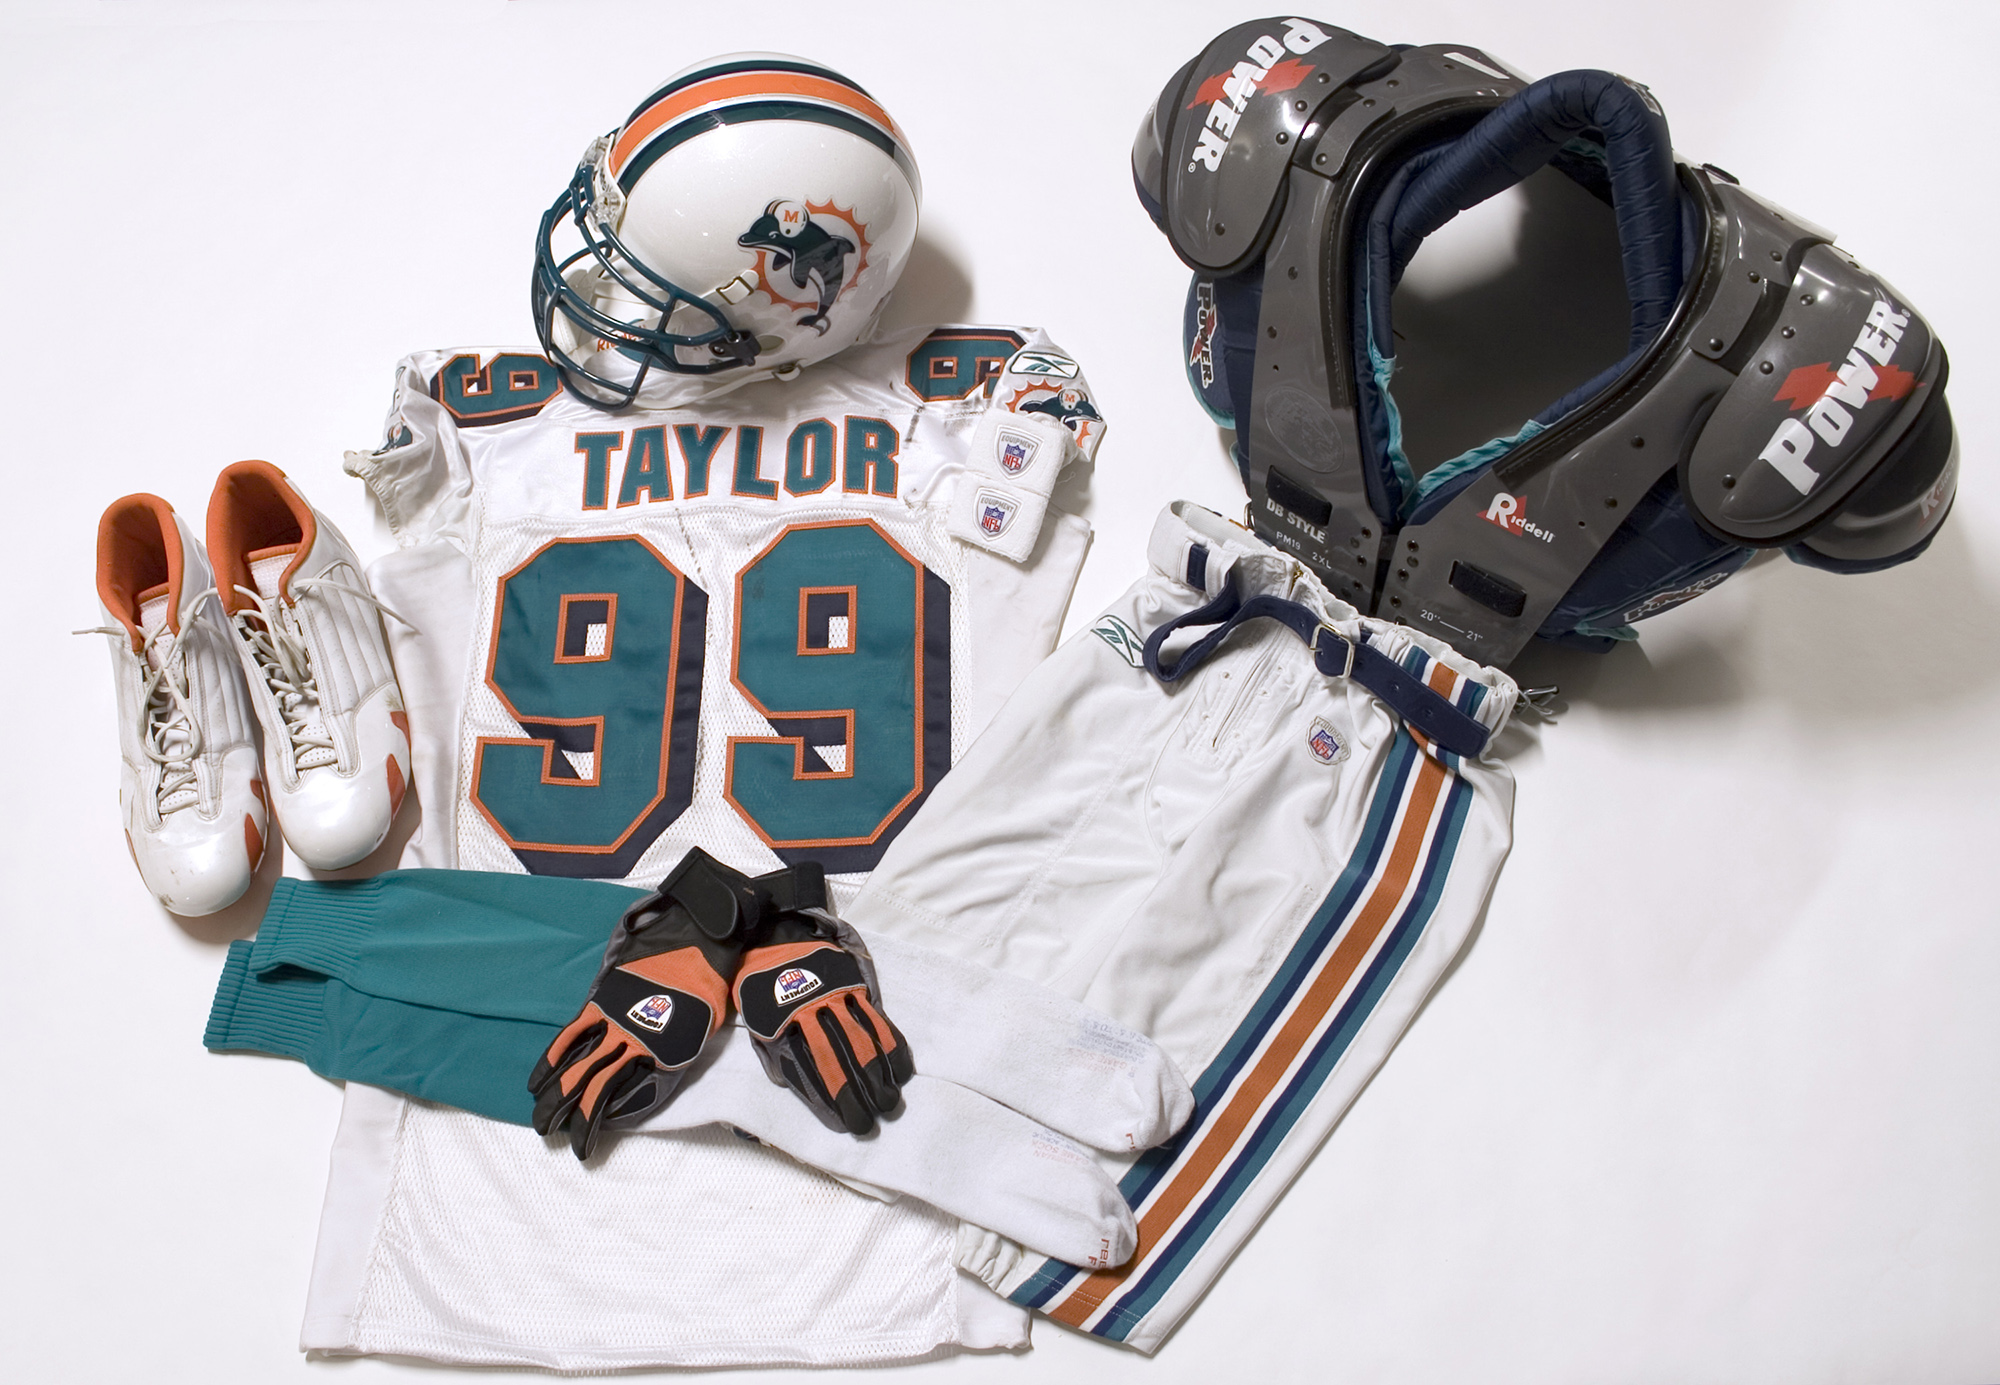 Jason Taylor spent much of his Pro Football Hall of Fame career playing for the Miami Dolphins and he remains close with the organization.